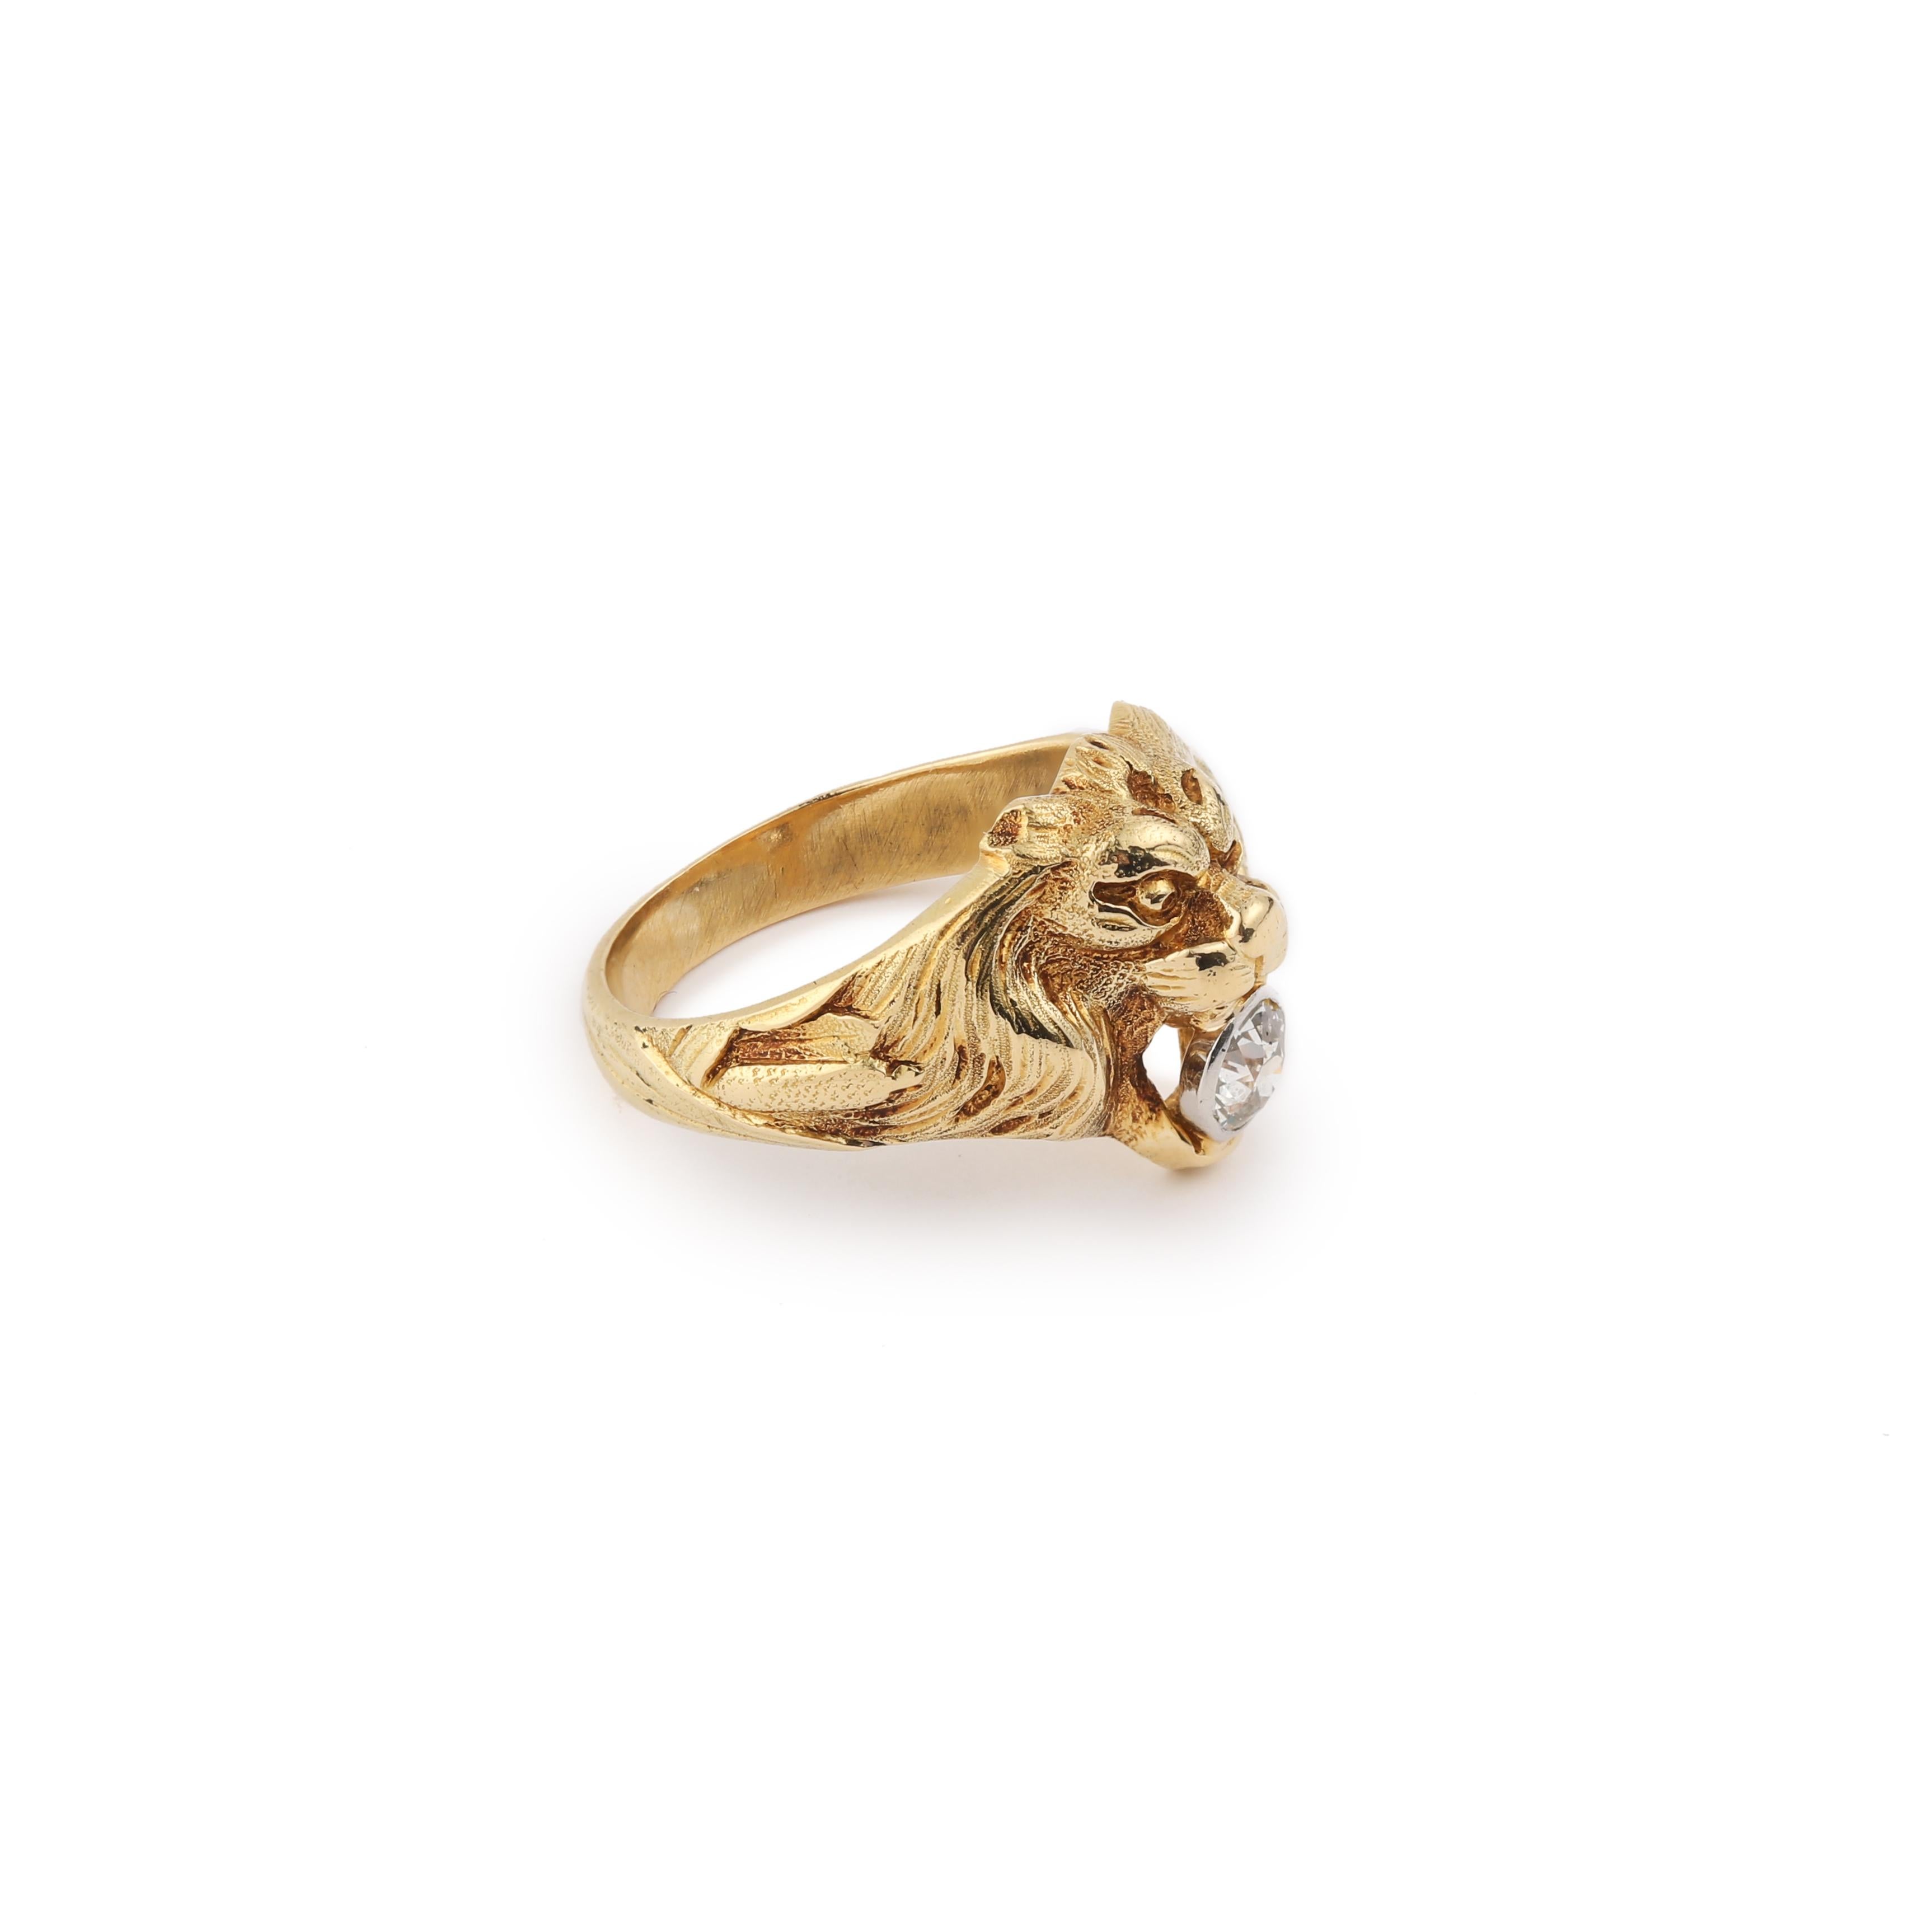 orginal signet ring with a lion figure, its jaw enclosing an old cut diamond.

Estimated diamond weight : 0.35 carat

Dimensions : 14.94 x 20.82 x 5.78 mm (0.588 x 0.819 x 0.227 inch)

Finger size: 56.5 (US 7 3/4)

Ring weight : 9.10 g

French work